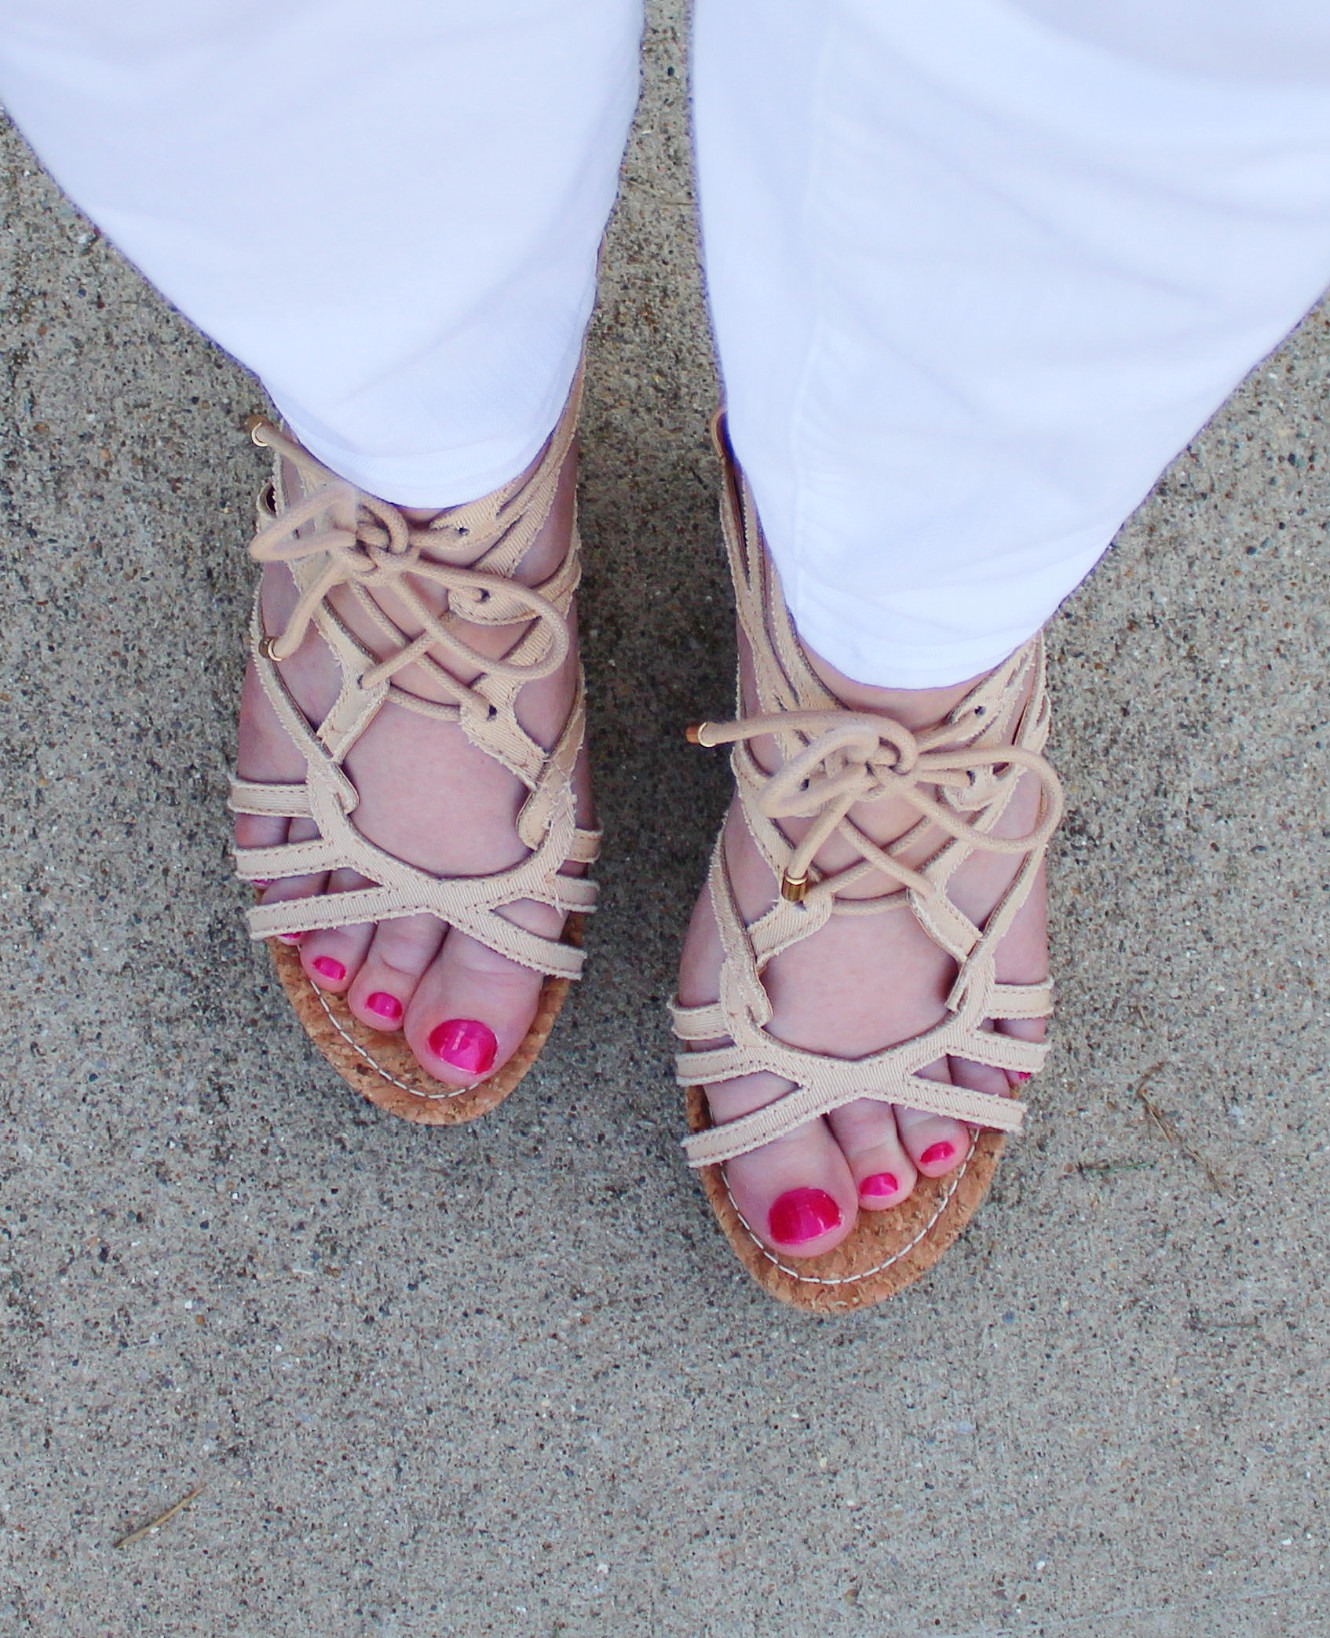 Polished Toe Nails And Sandals